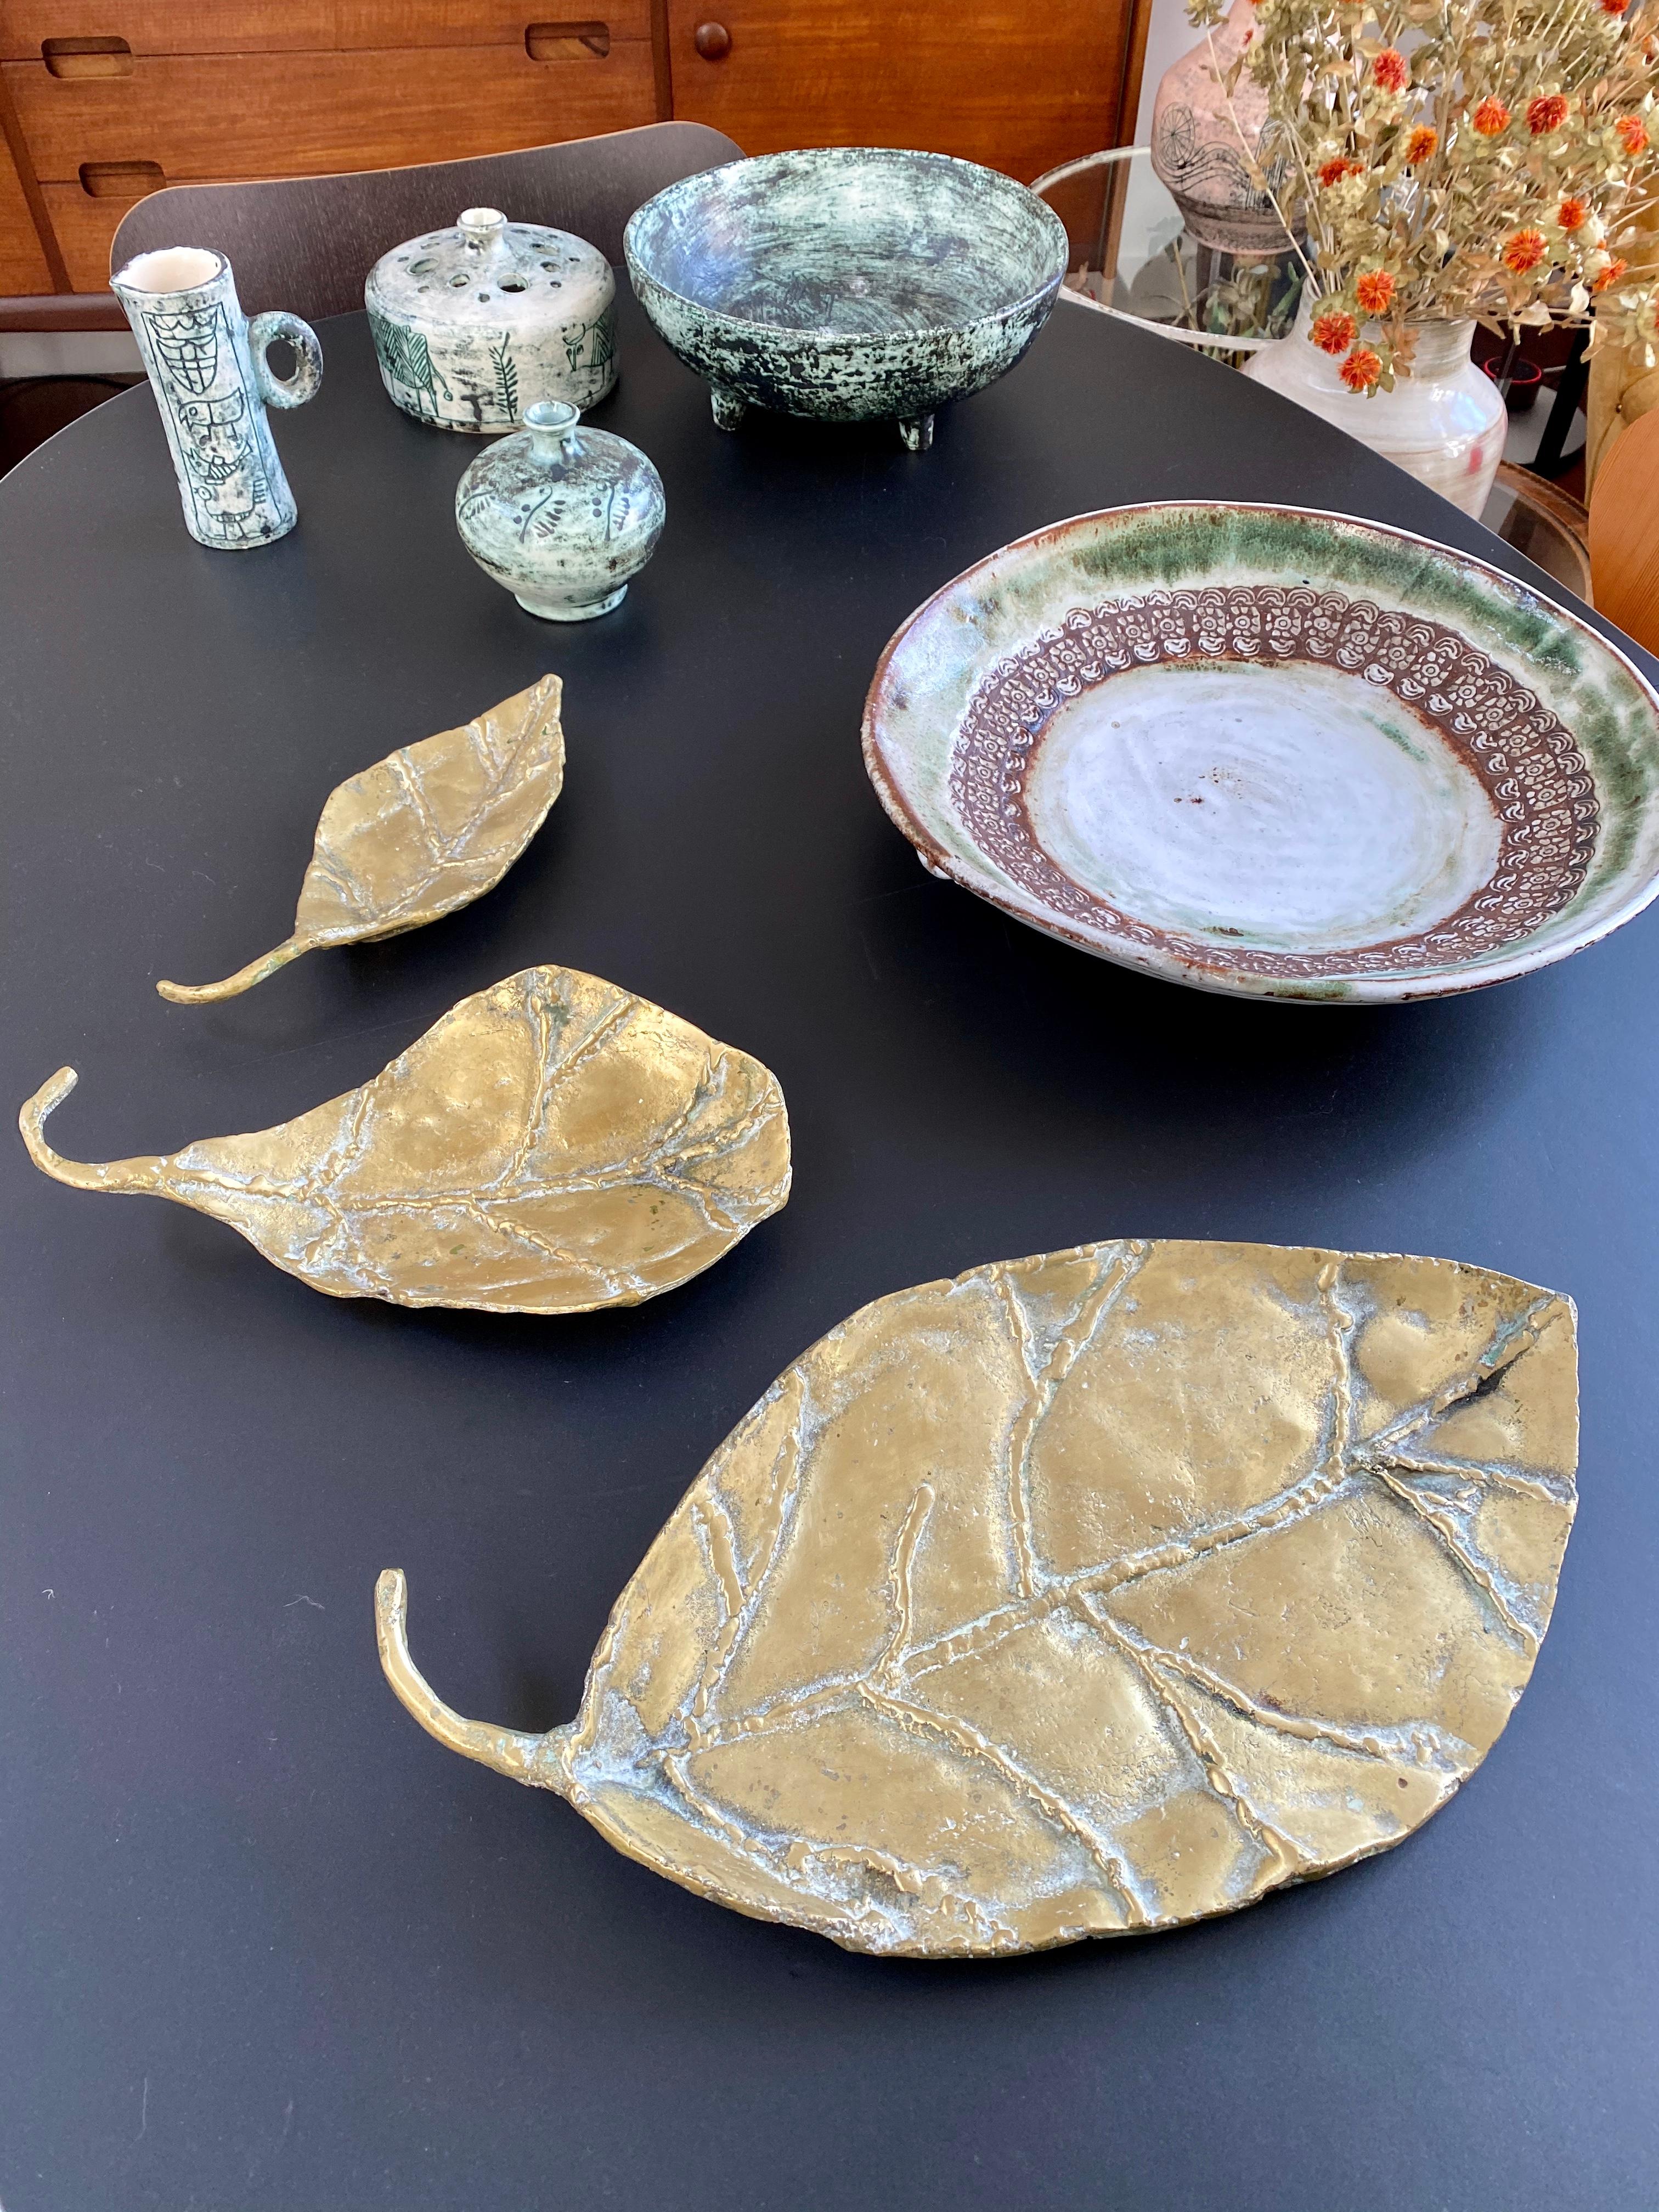 Set of three brass decorative leaves / trays by David Marshall (circa 1980s). Weighty (three combined weigh 5.6 kg / 12.3 lbs), stunning and wonderfully tactile, these brass leaves may be used decoratively in many settings in your home or workspace.